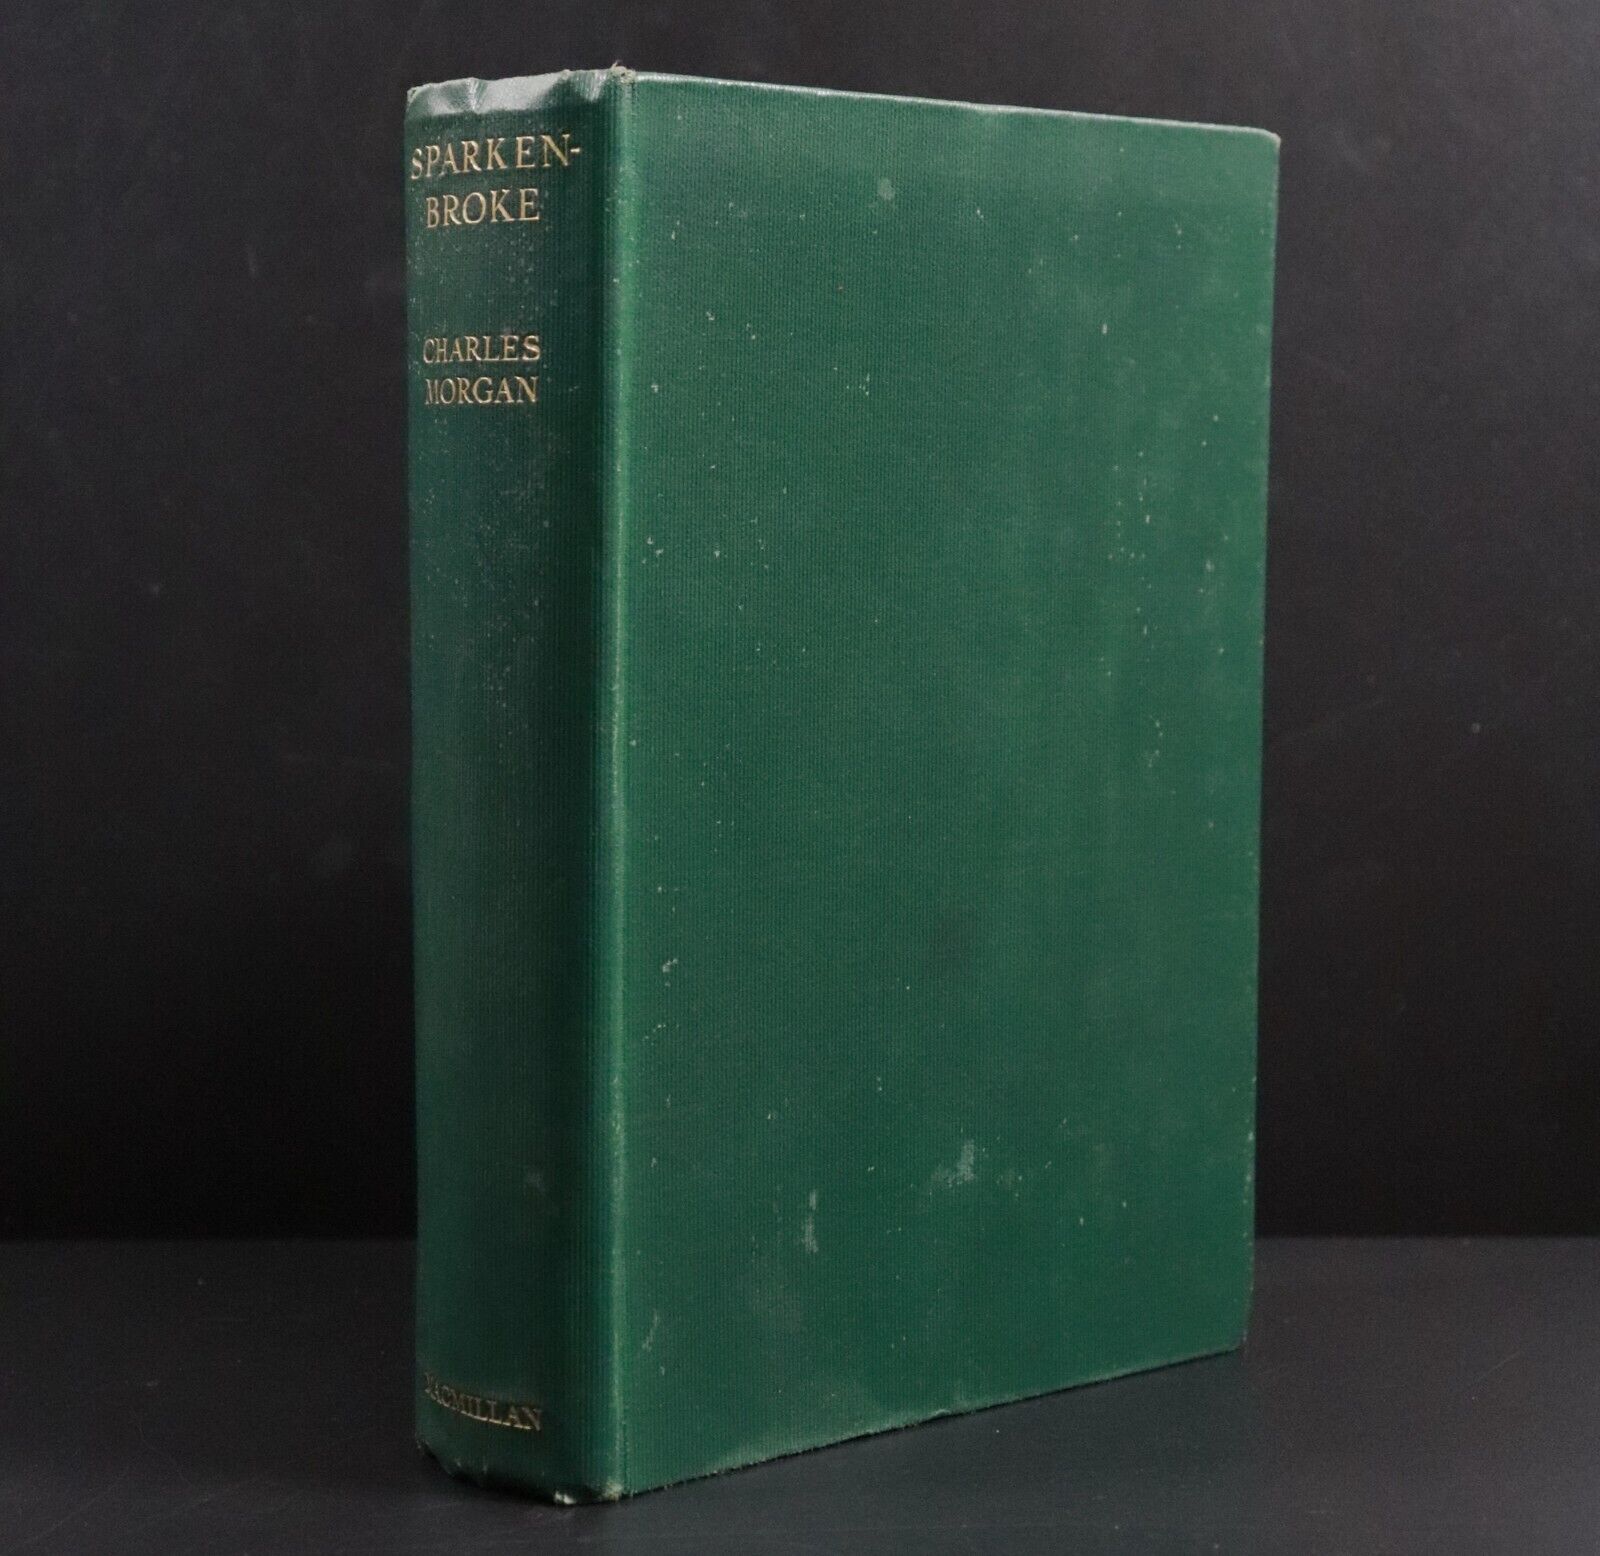 1936 Sparkenbroke by Charles Morgan Antique Classic Fiction Book 1st Ed Colonies